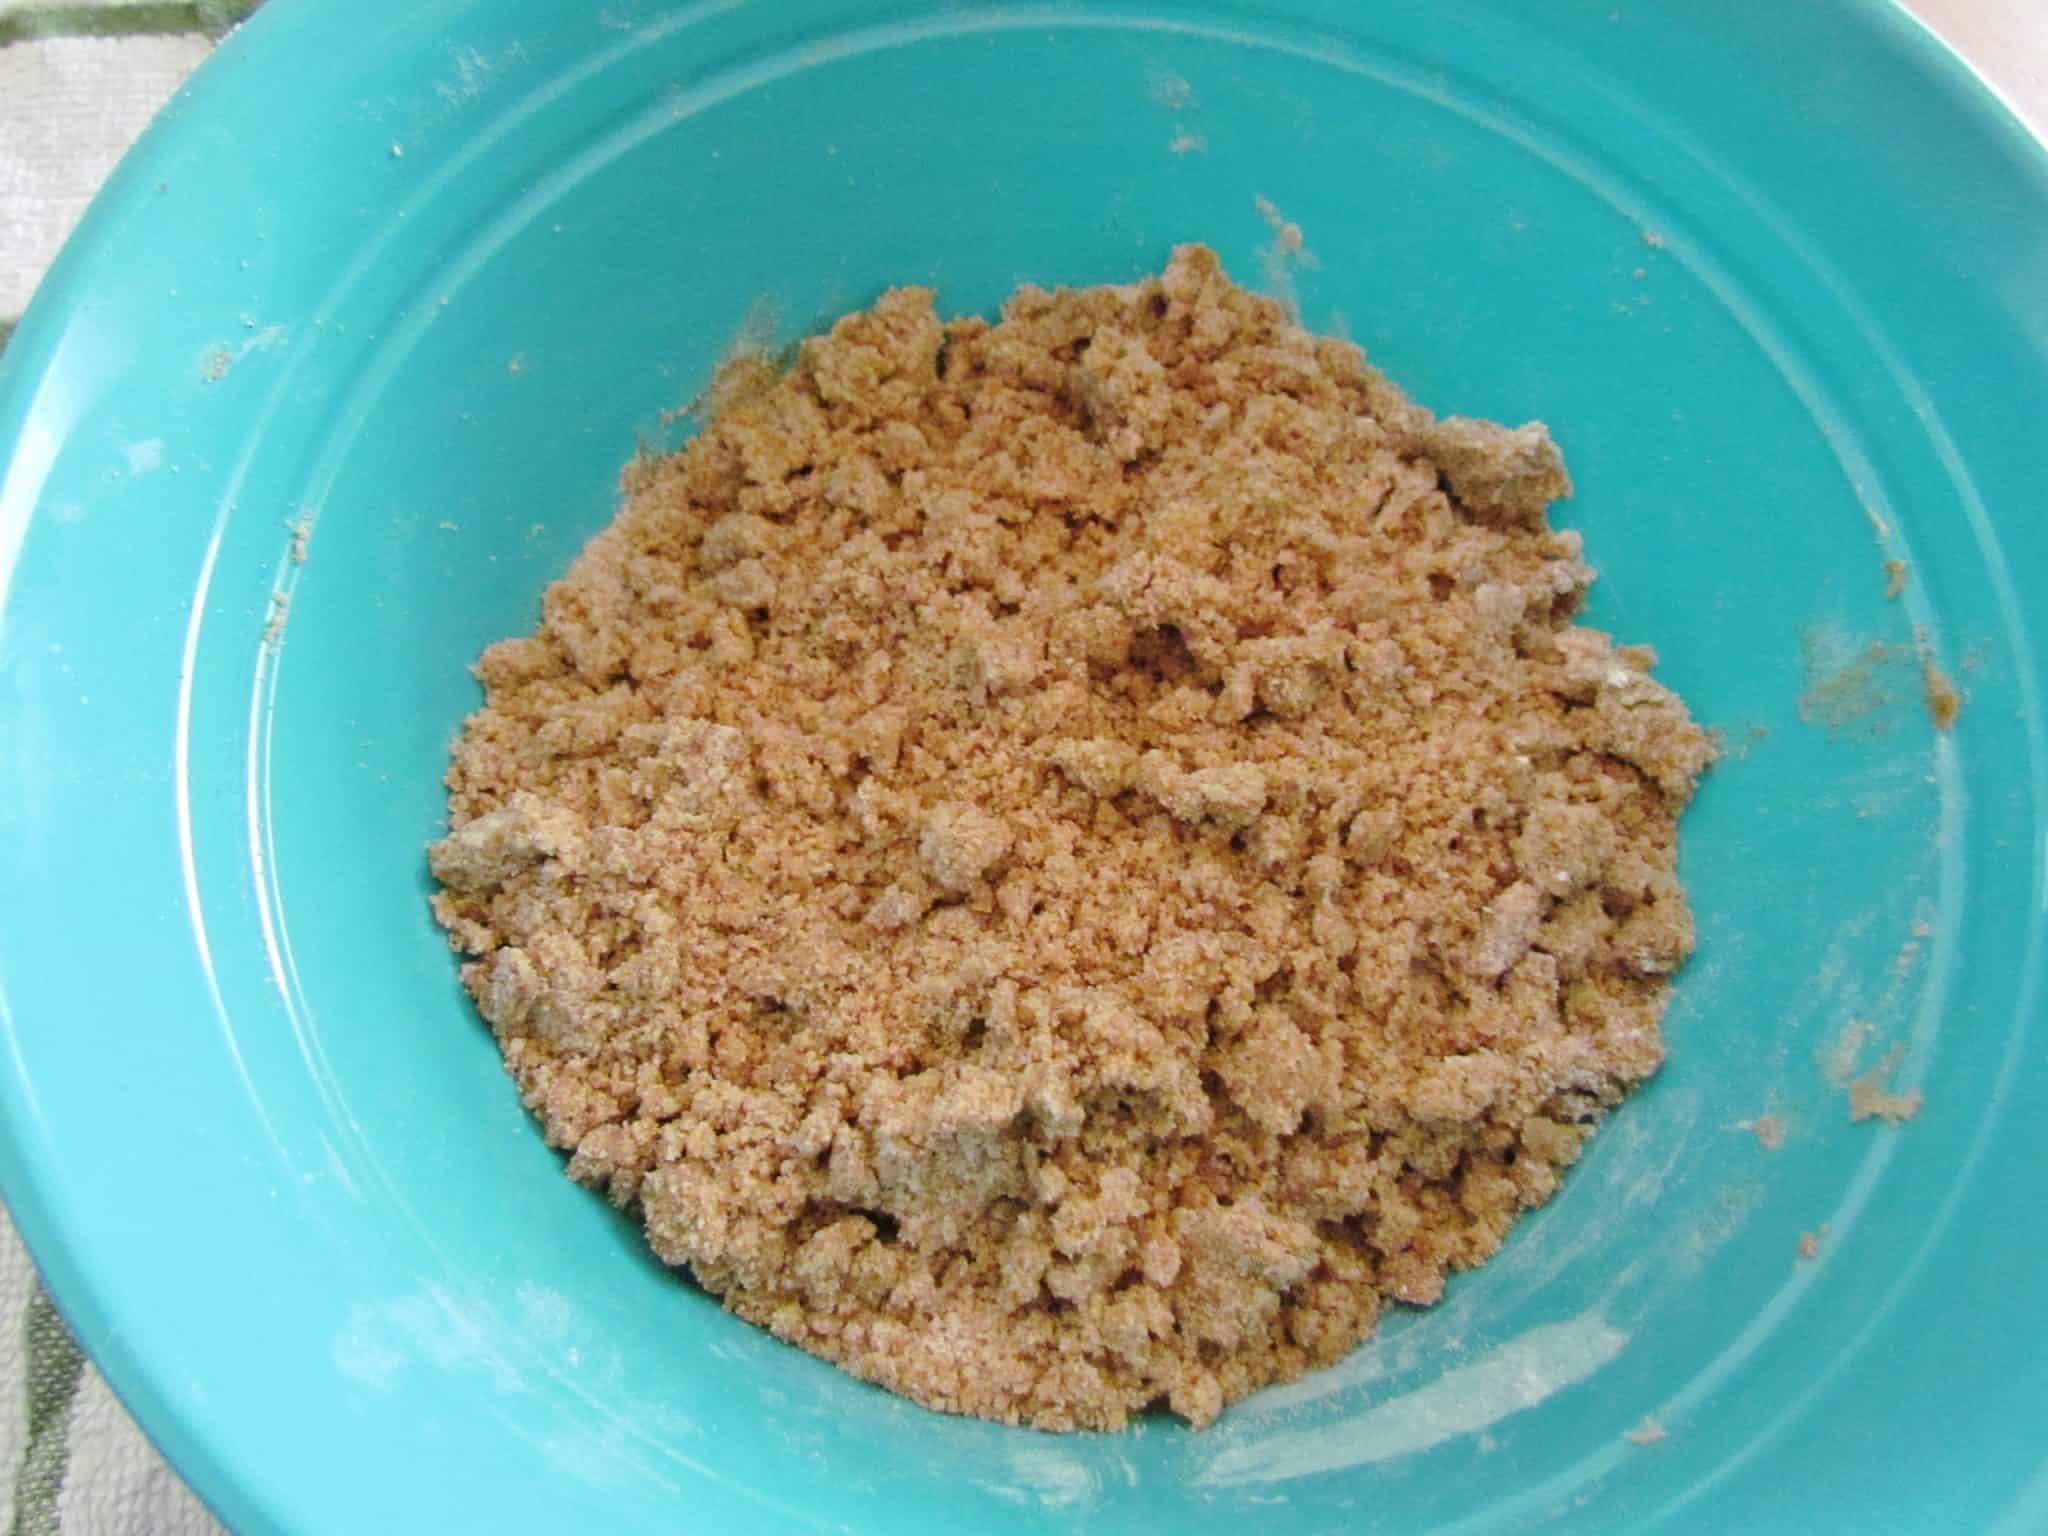 fully mixed brown sugar crumble in a blue bowl.